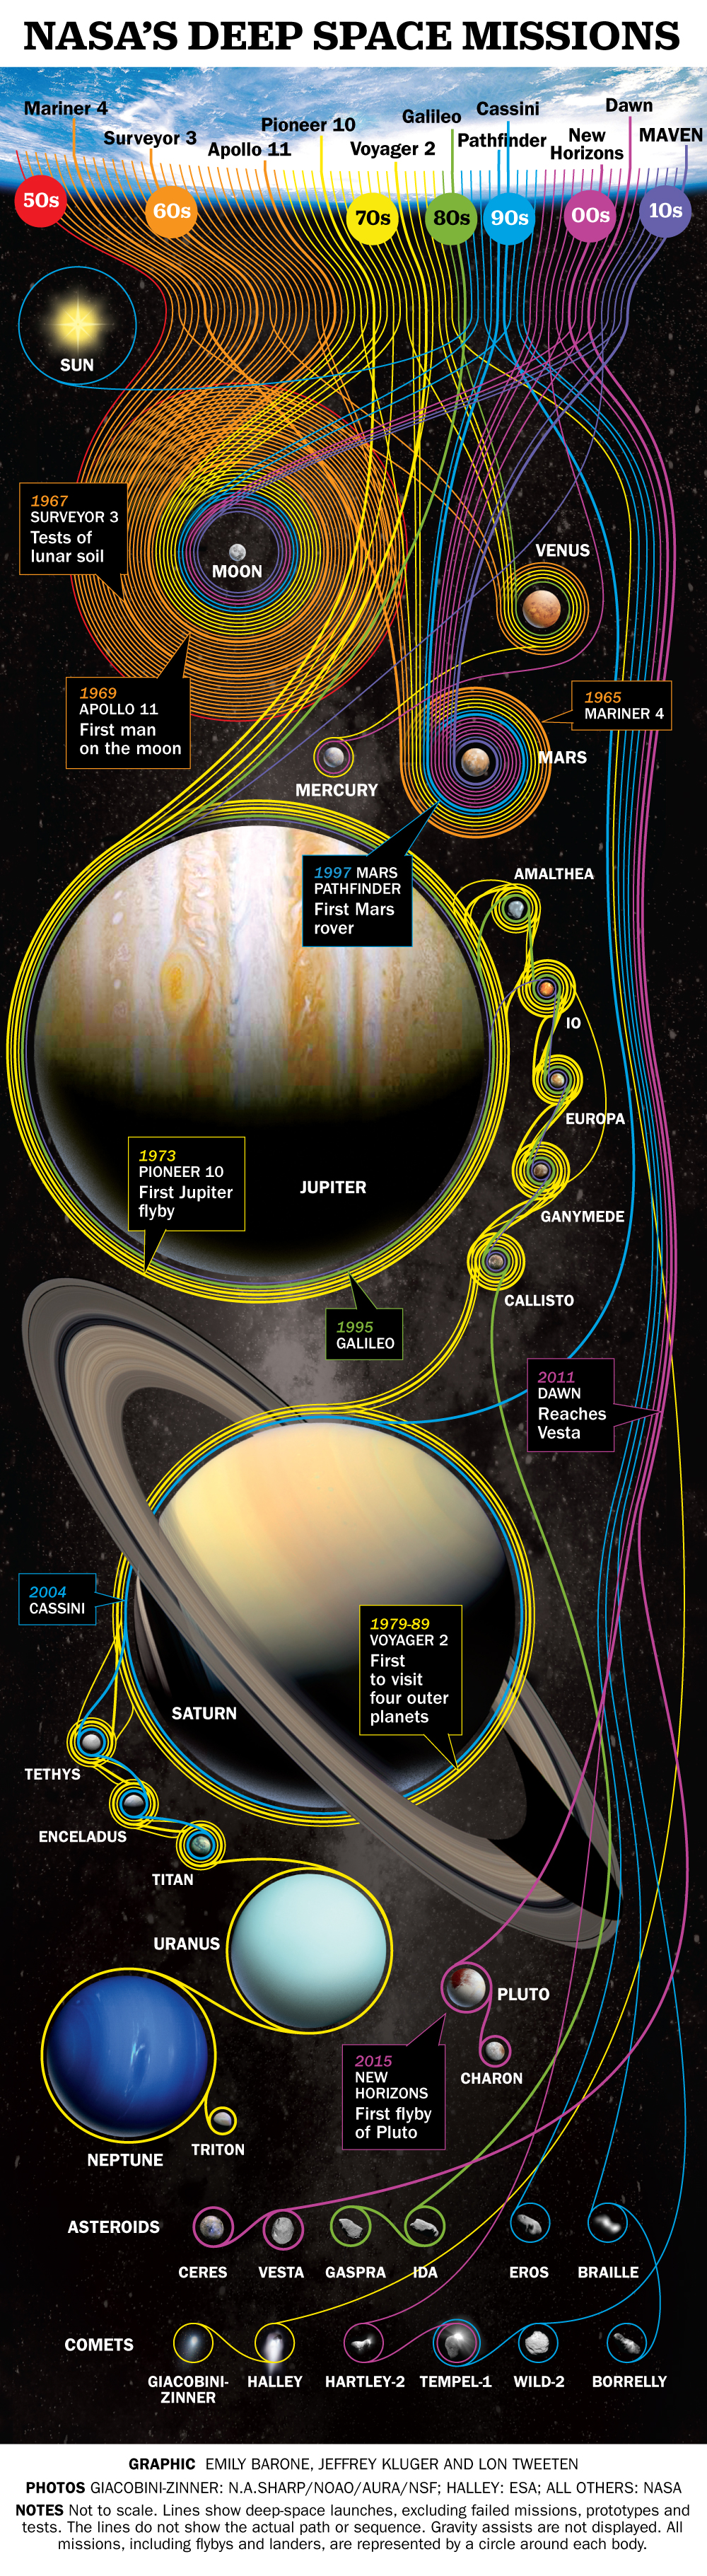 NASA Missions Infographic